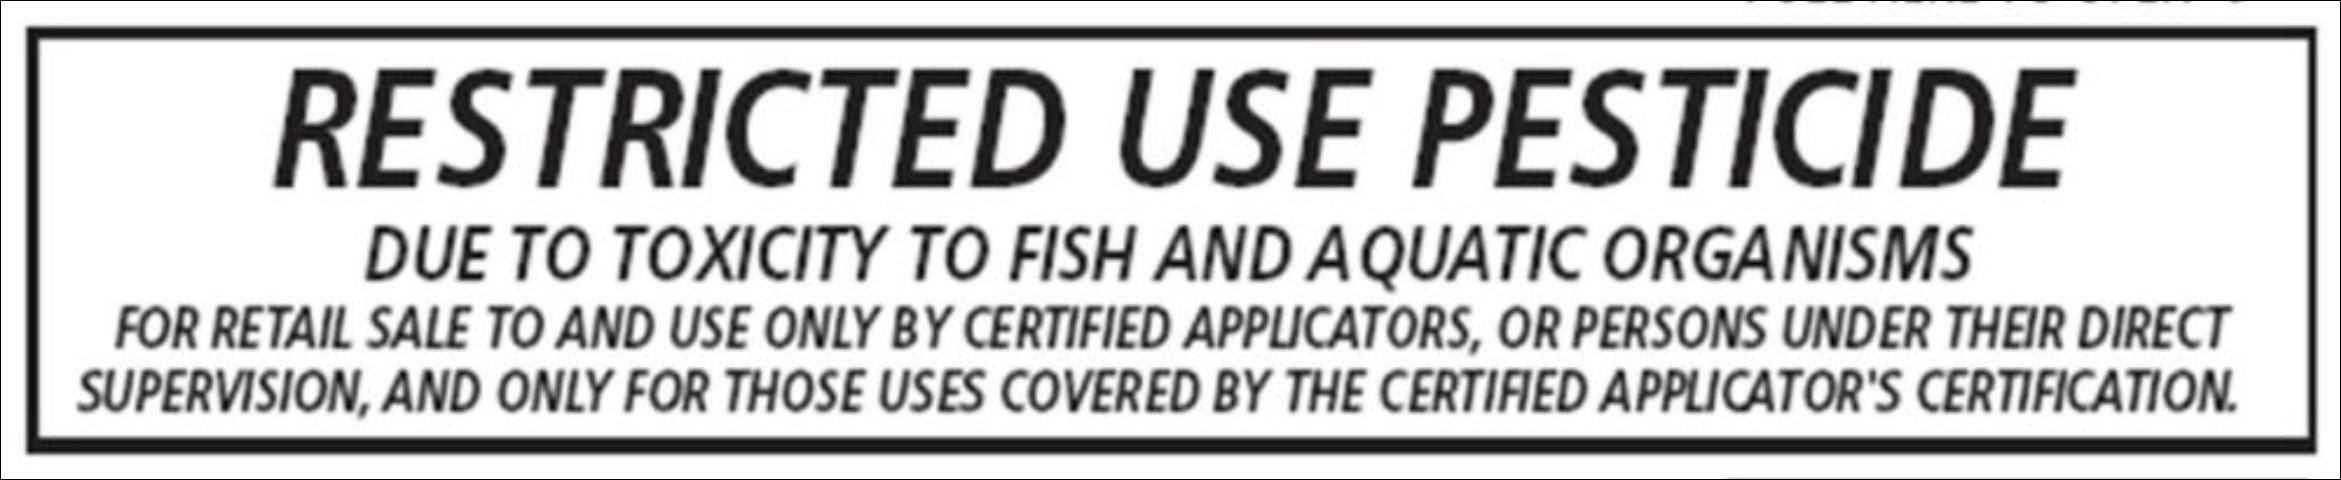 Figure 1. Restricted-use pesticide due to the pesticide's toxicity to fish and aquatic organisms